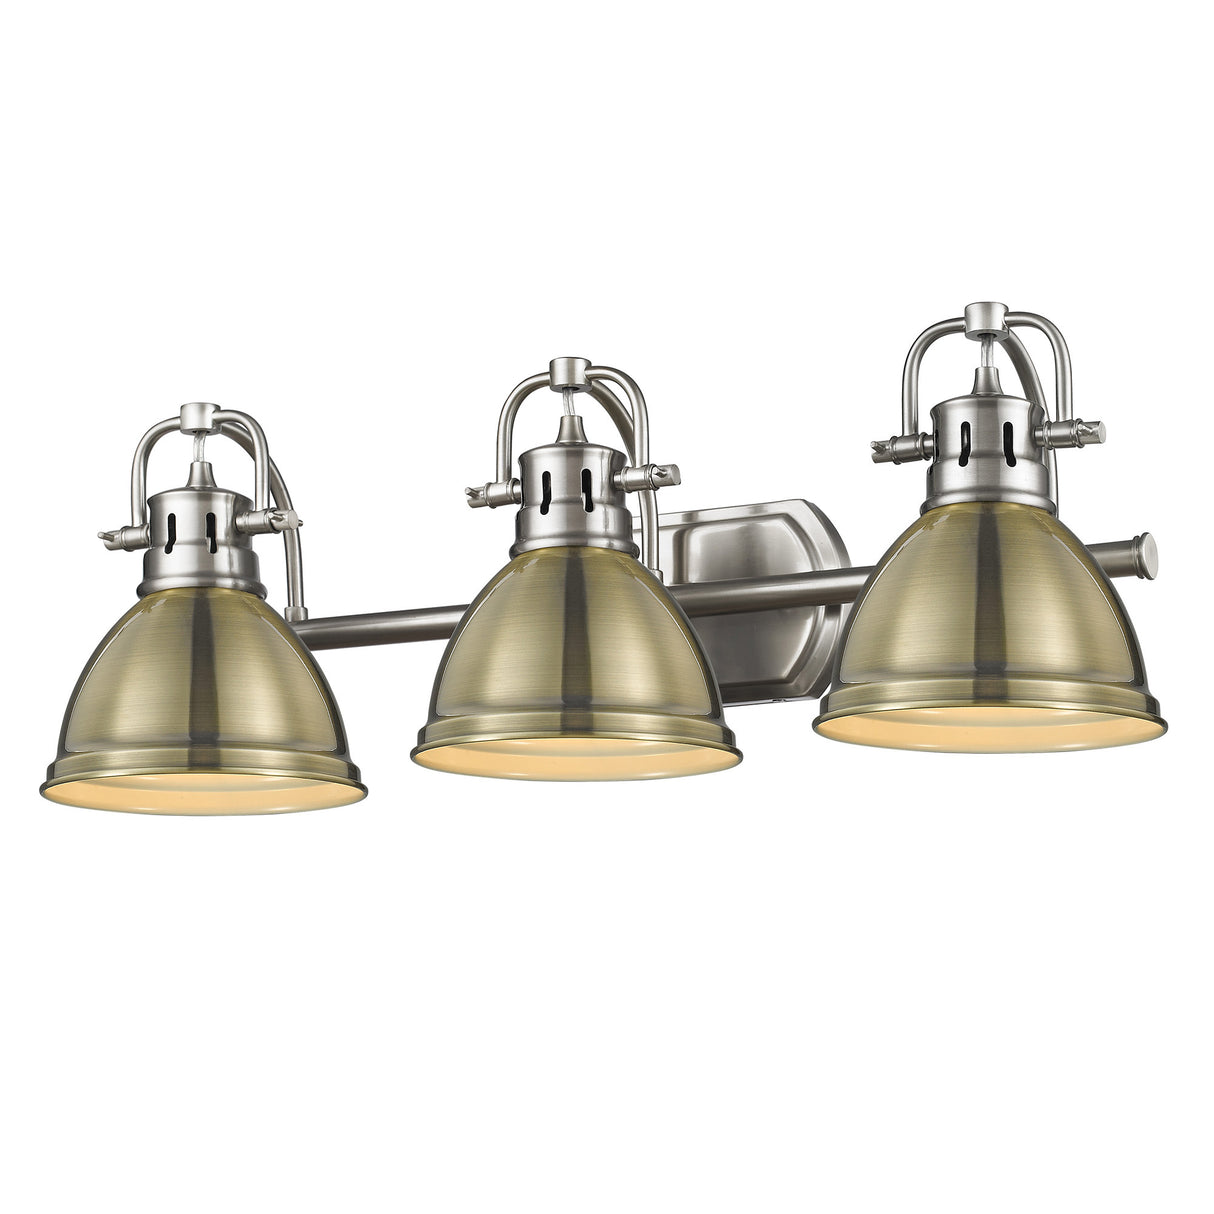 Duncan 3 Light Bath Vanity in Pewter with an Aged Brass Shade